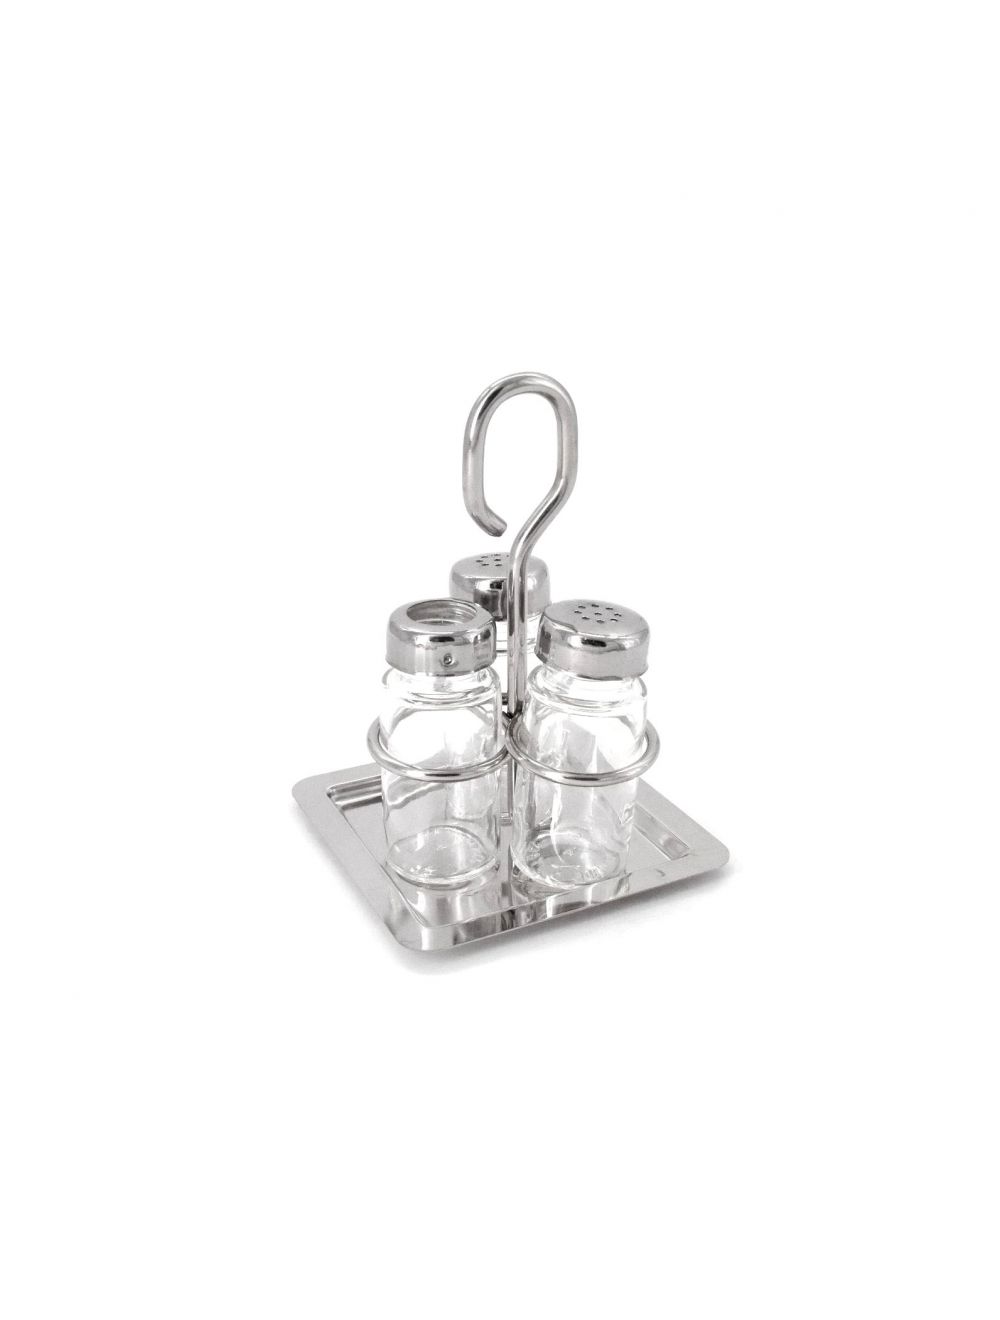 Condiment With Steel Holder 3 Pieces